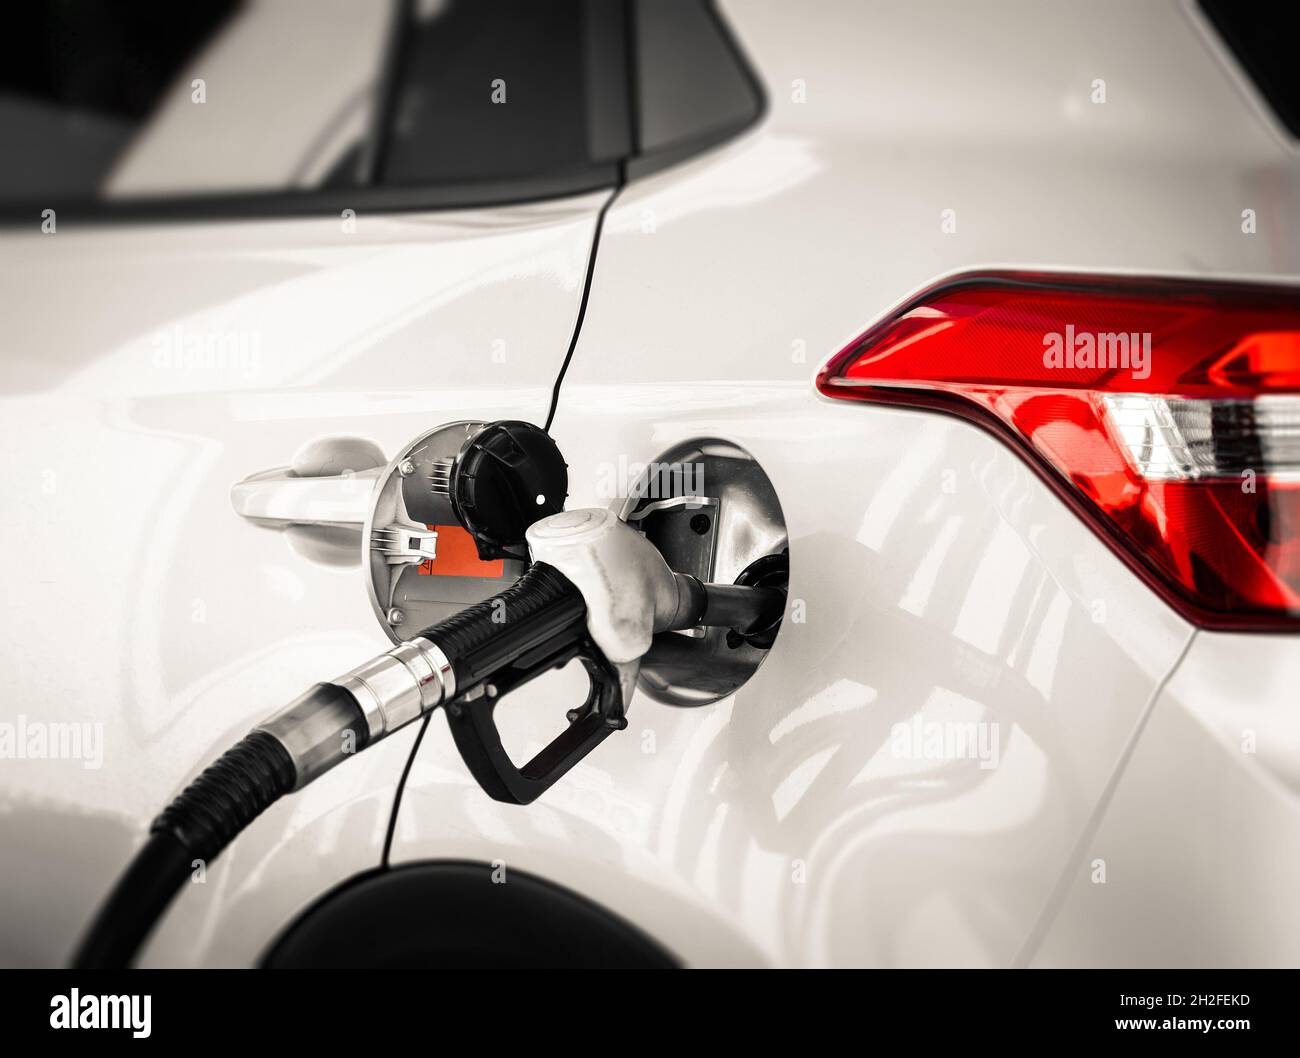 SUV big new car refueling at petrol gas station to filling with gasoline or diesel fuel. Refuel fueling pump nozzle pistol gun Stock Photo